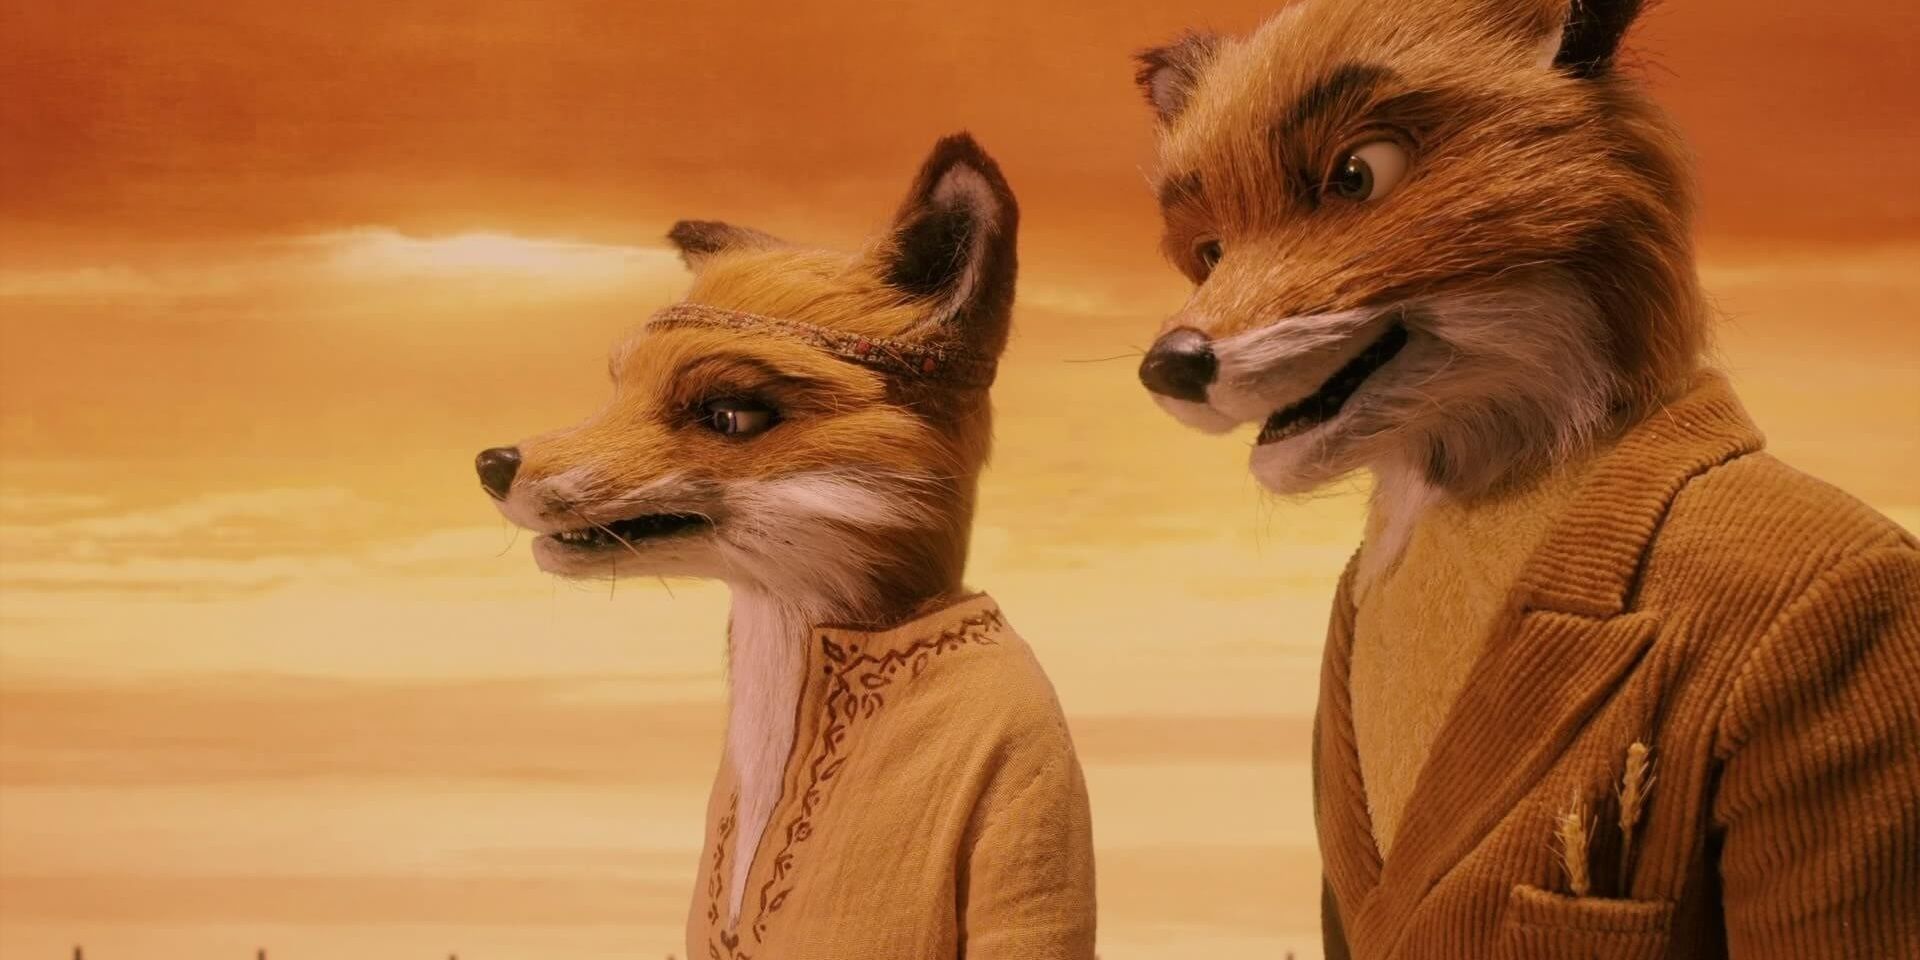 Mr and Mrs Fox standing in a field in Fantastic Mr Fox.